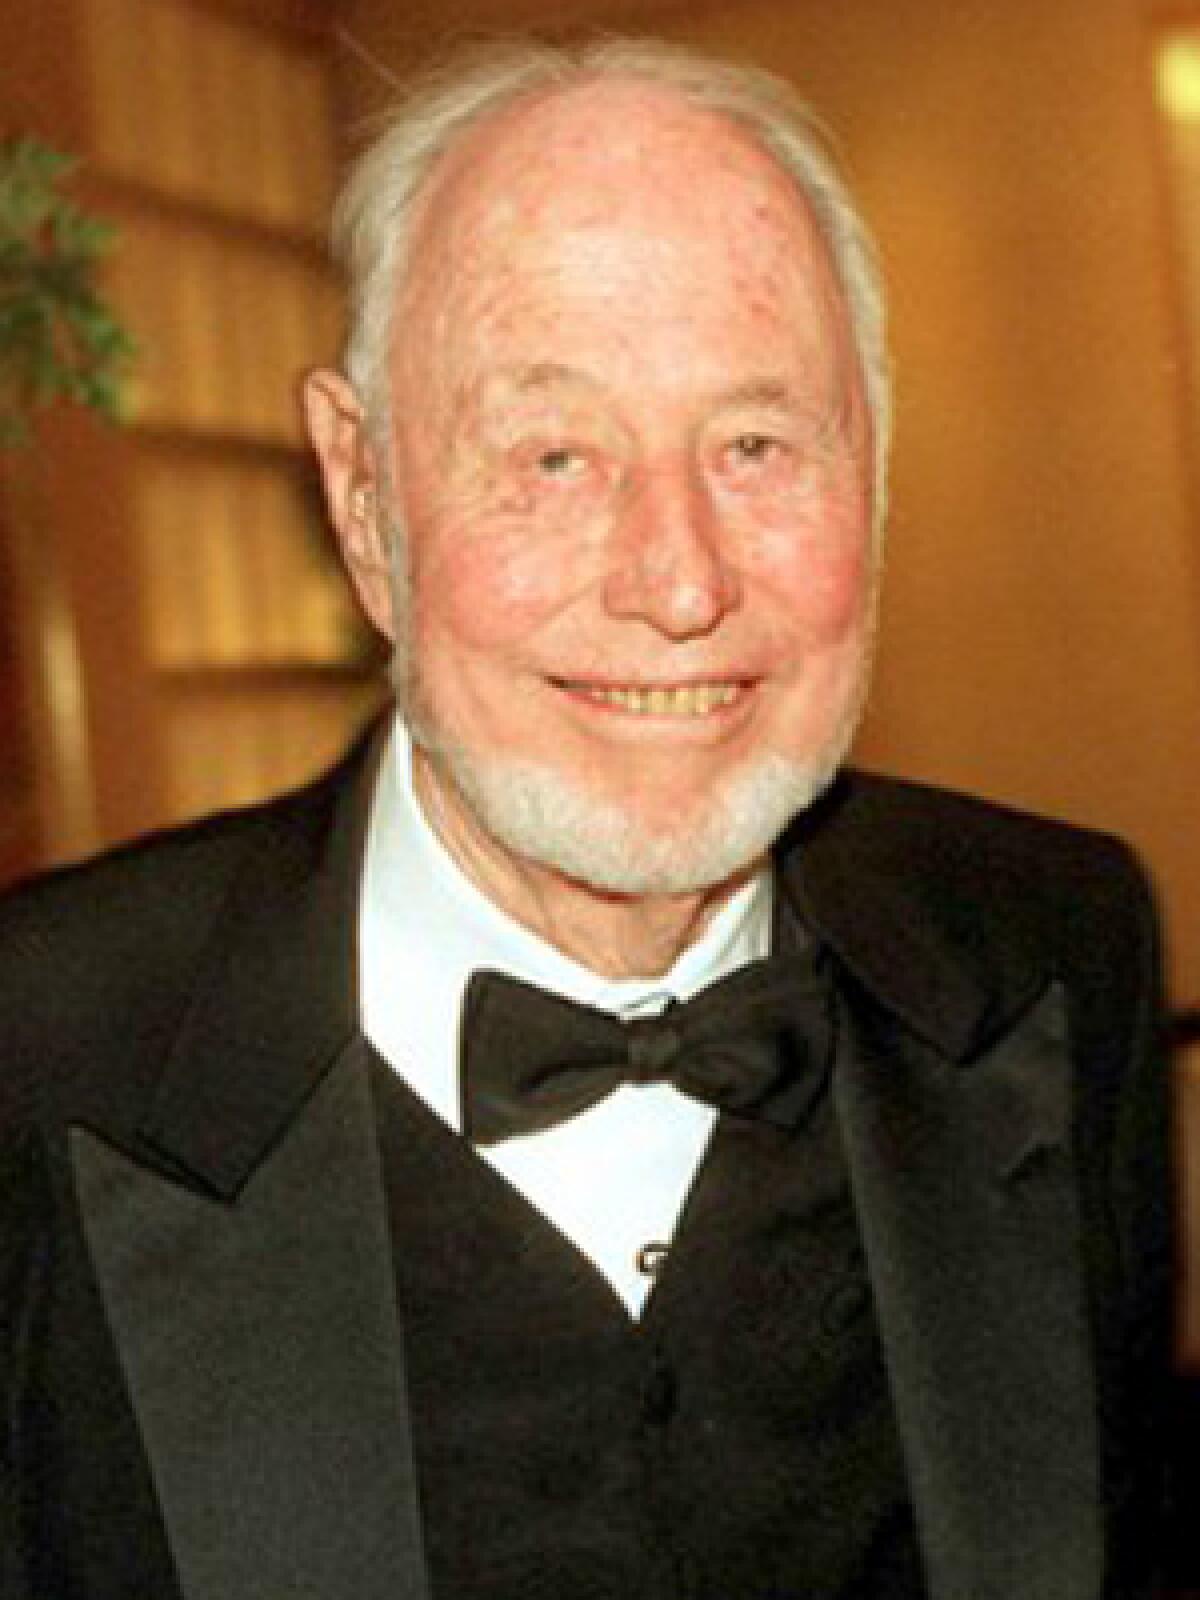 Robert R. Sprague, founder of L.A.-based Pioneer Savings and Loan Assn., was a major donor to UC Irvine.